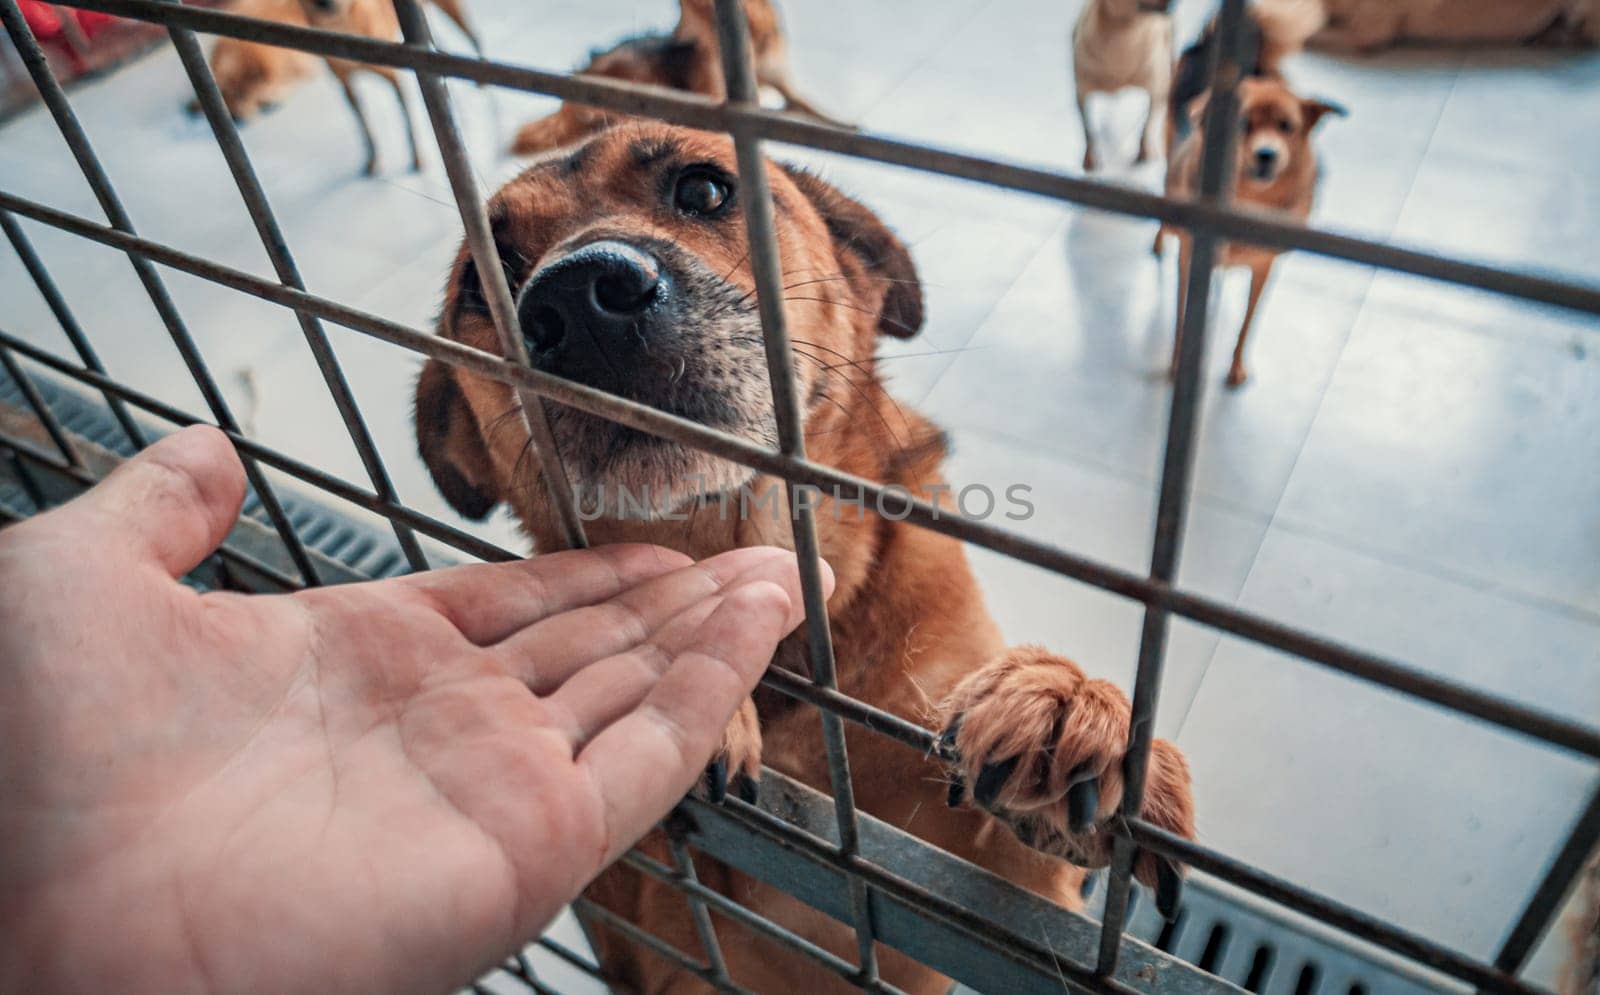 Male hand petting caged stray dog in pet shelter. People, Animals, Volunteering And Helping Concept.